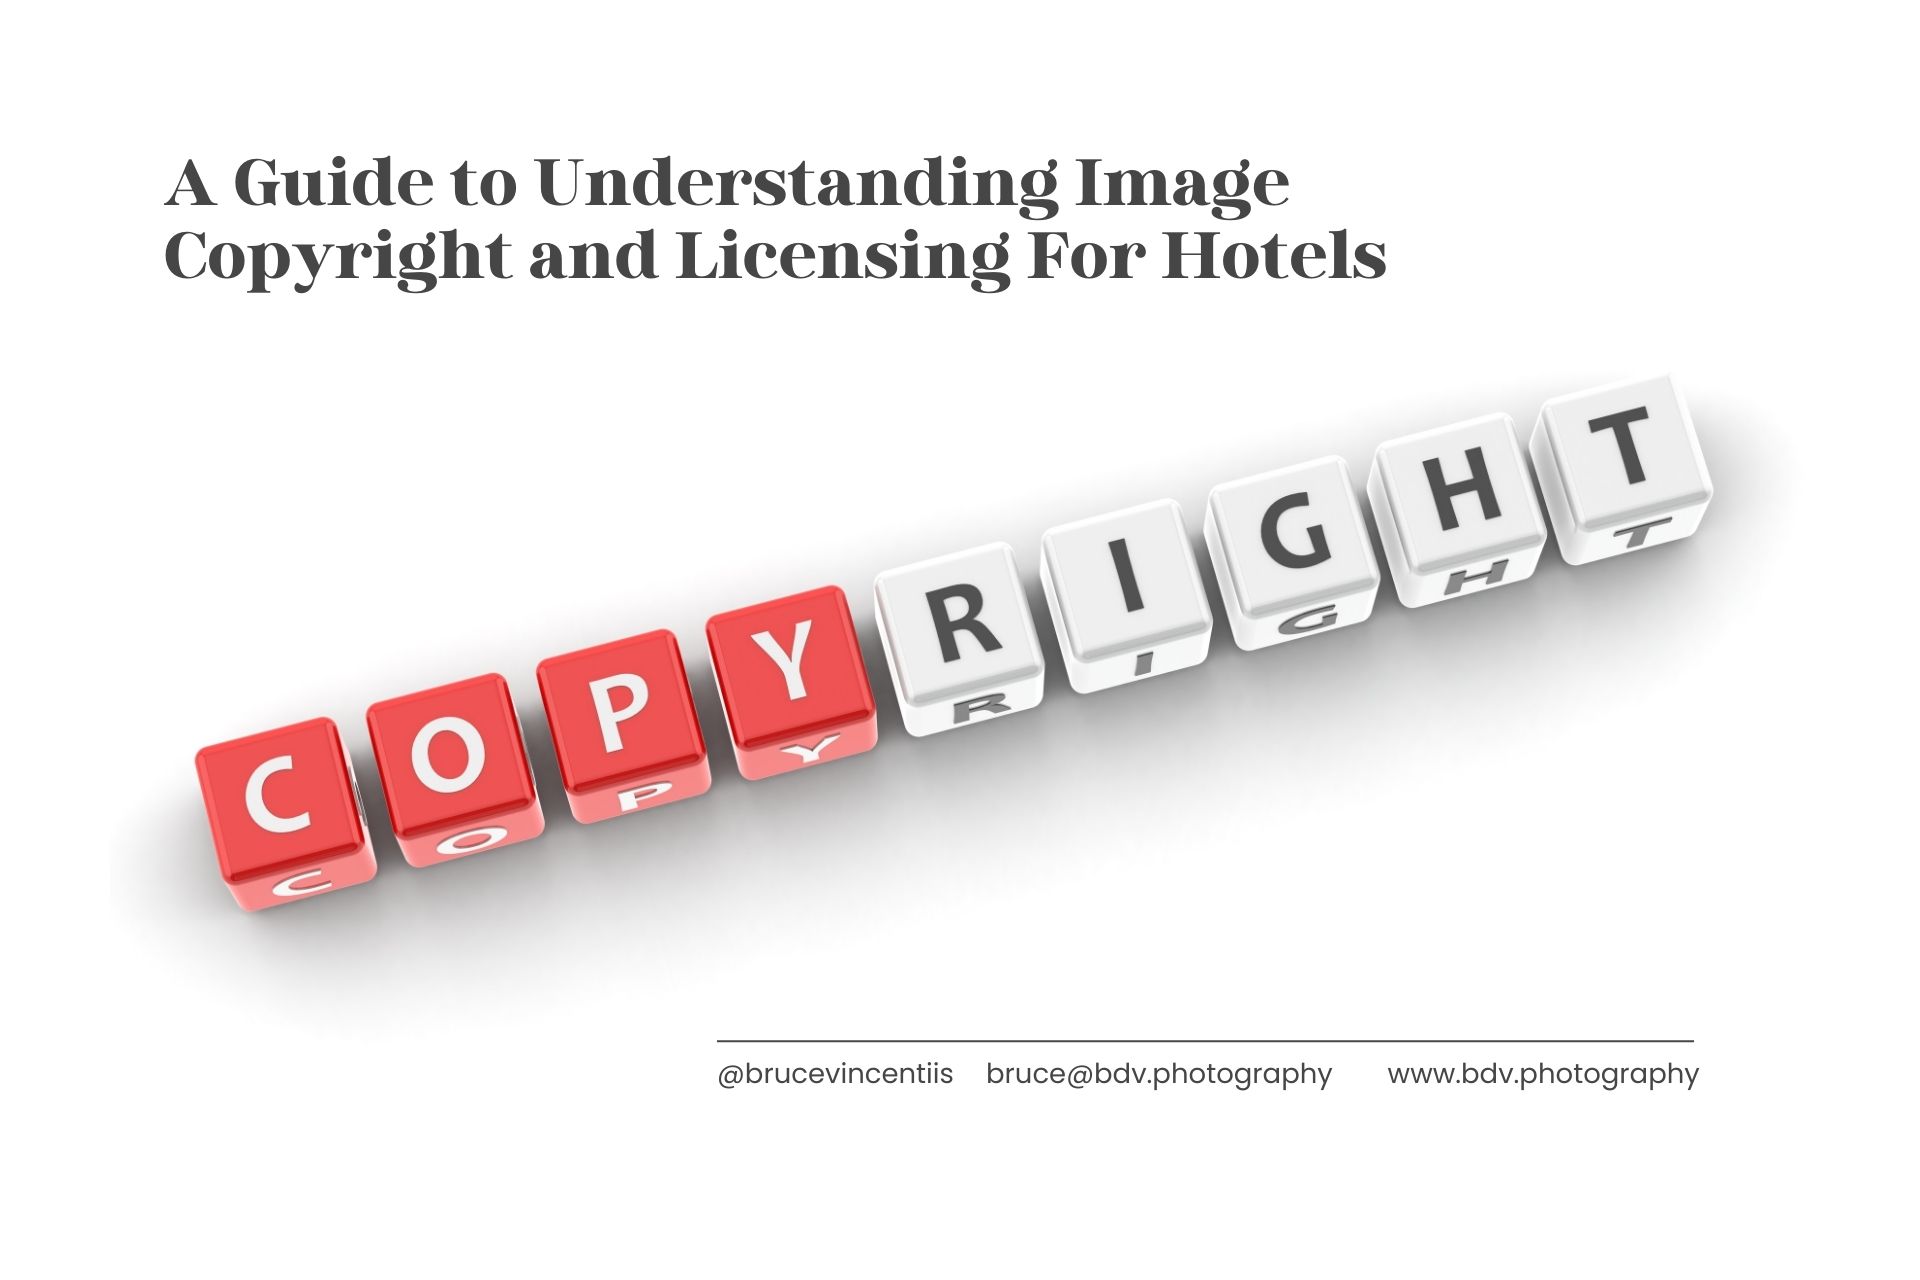 Hotel Marketing Guide To Photo Copyright and Licensing